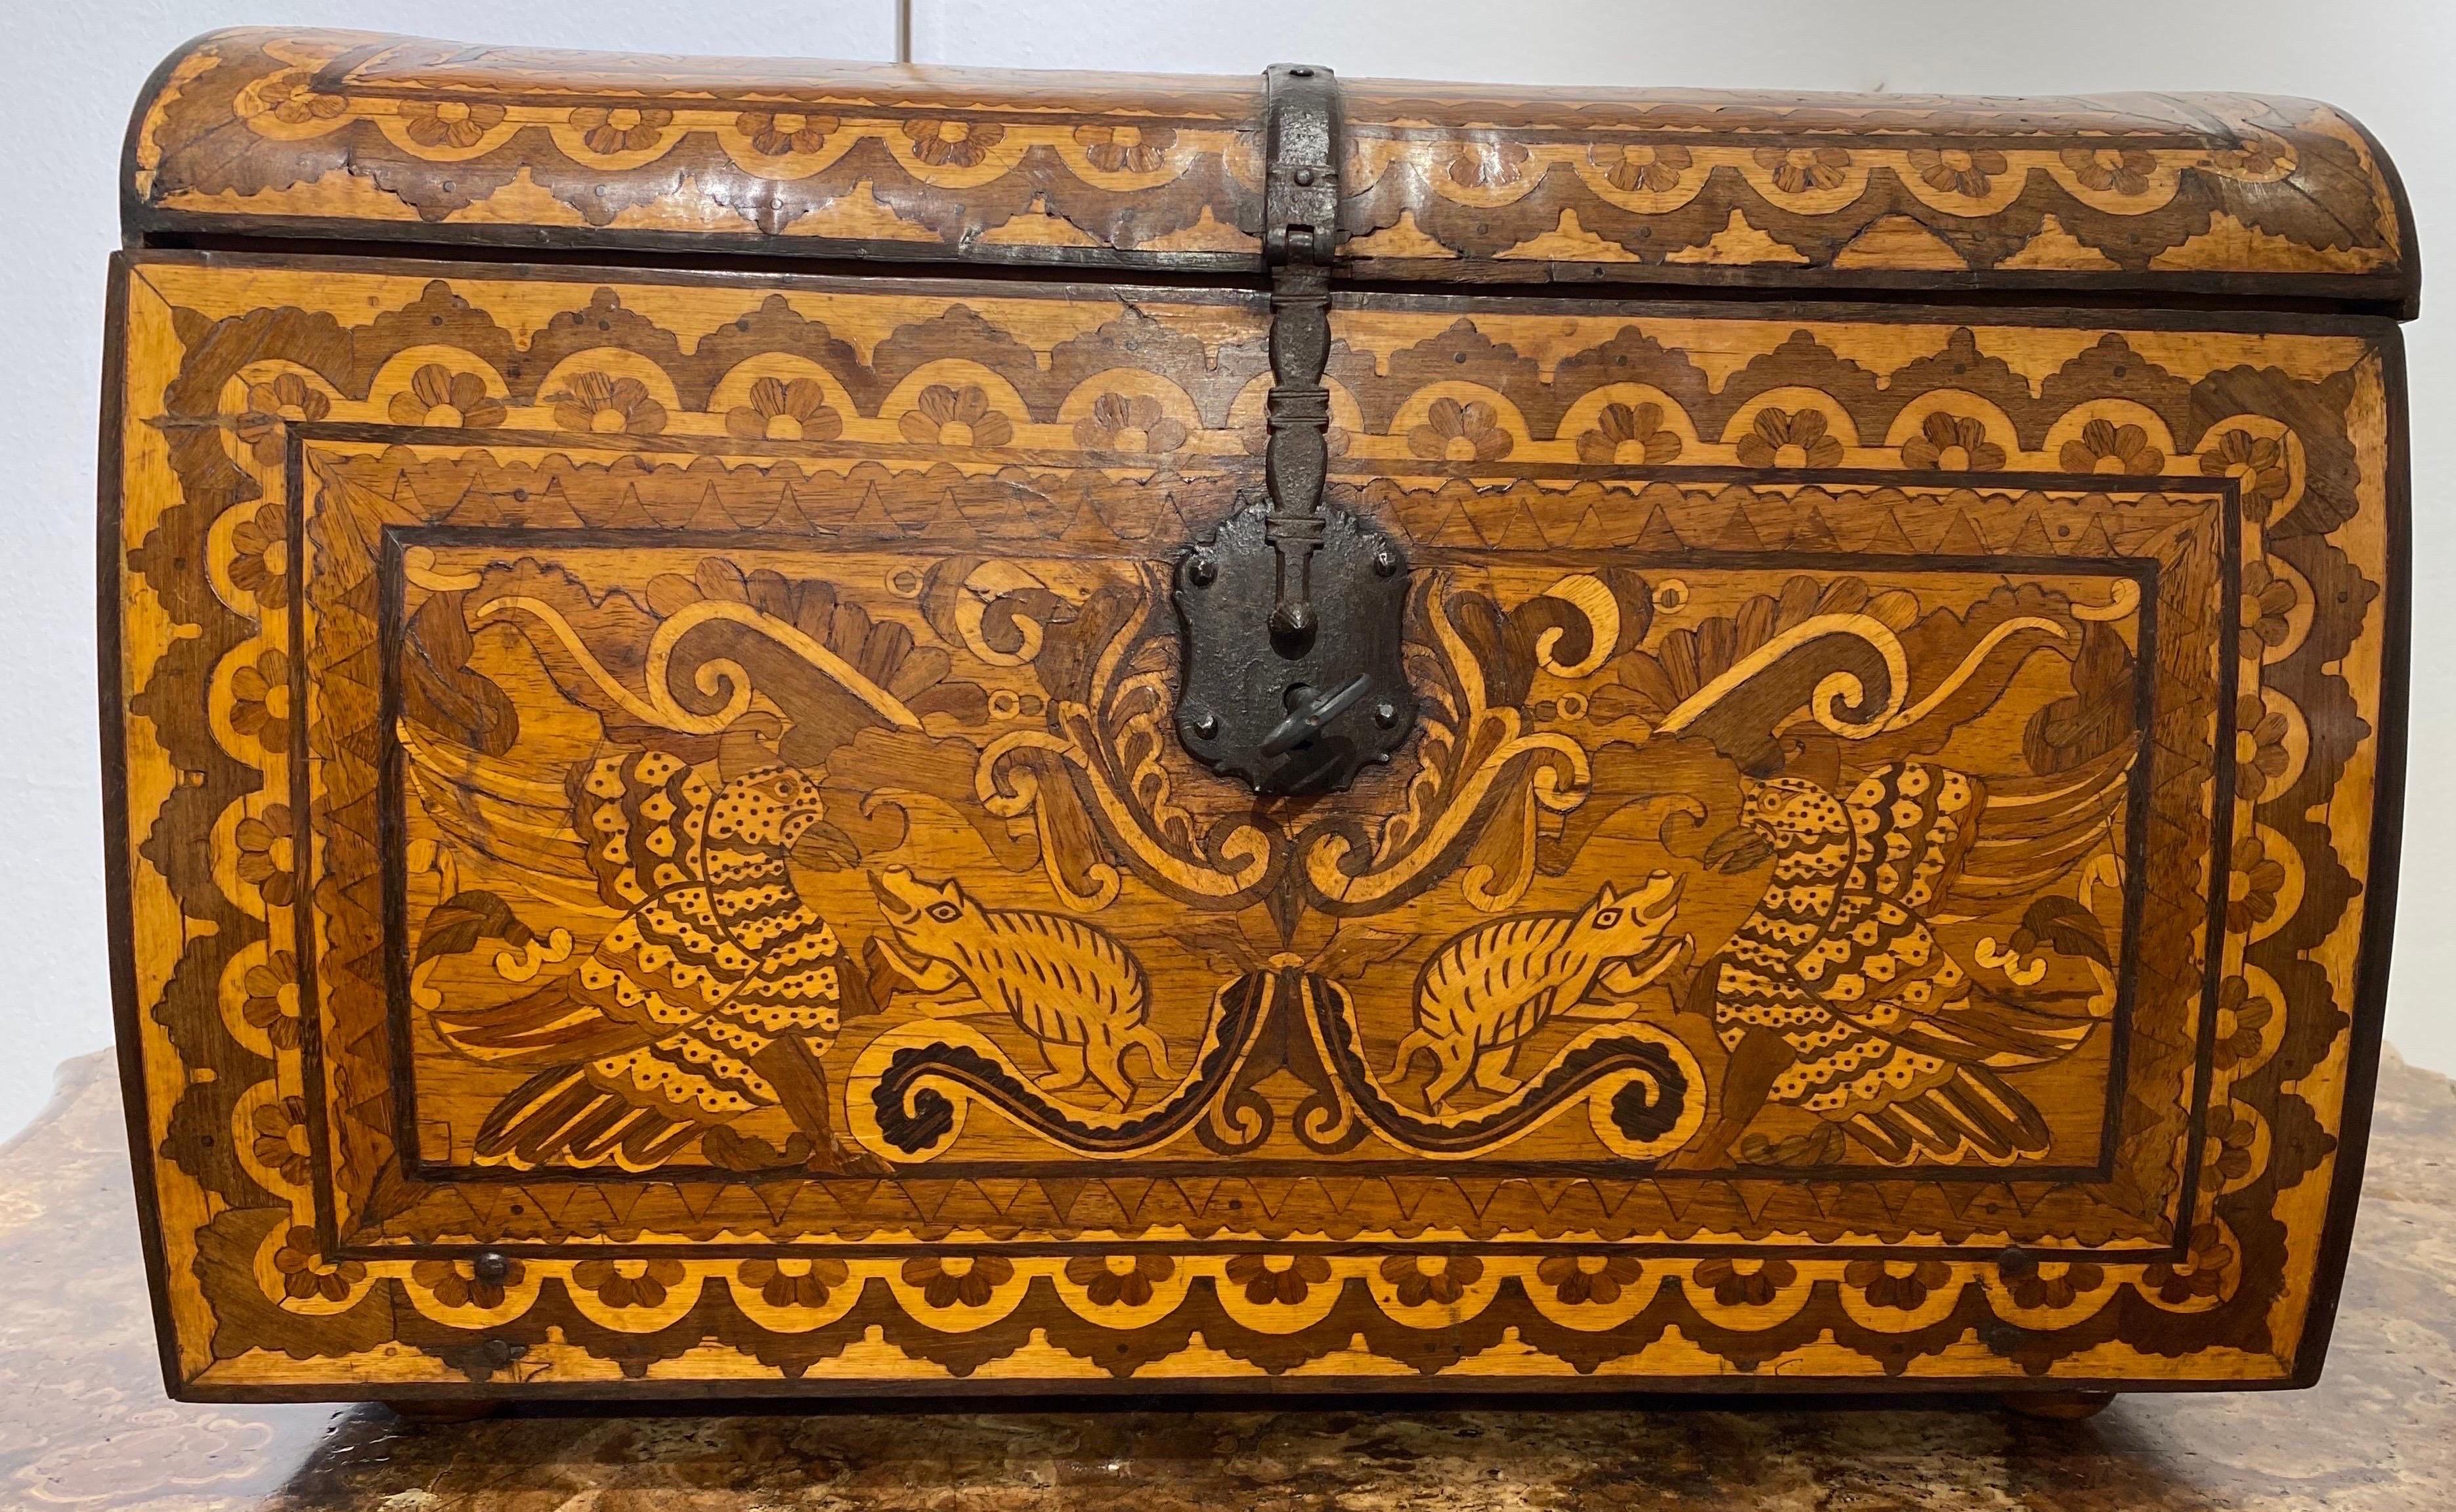 17 century
Mexican casket - Art by Unknown